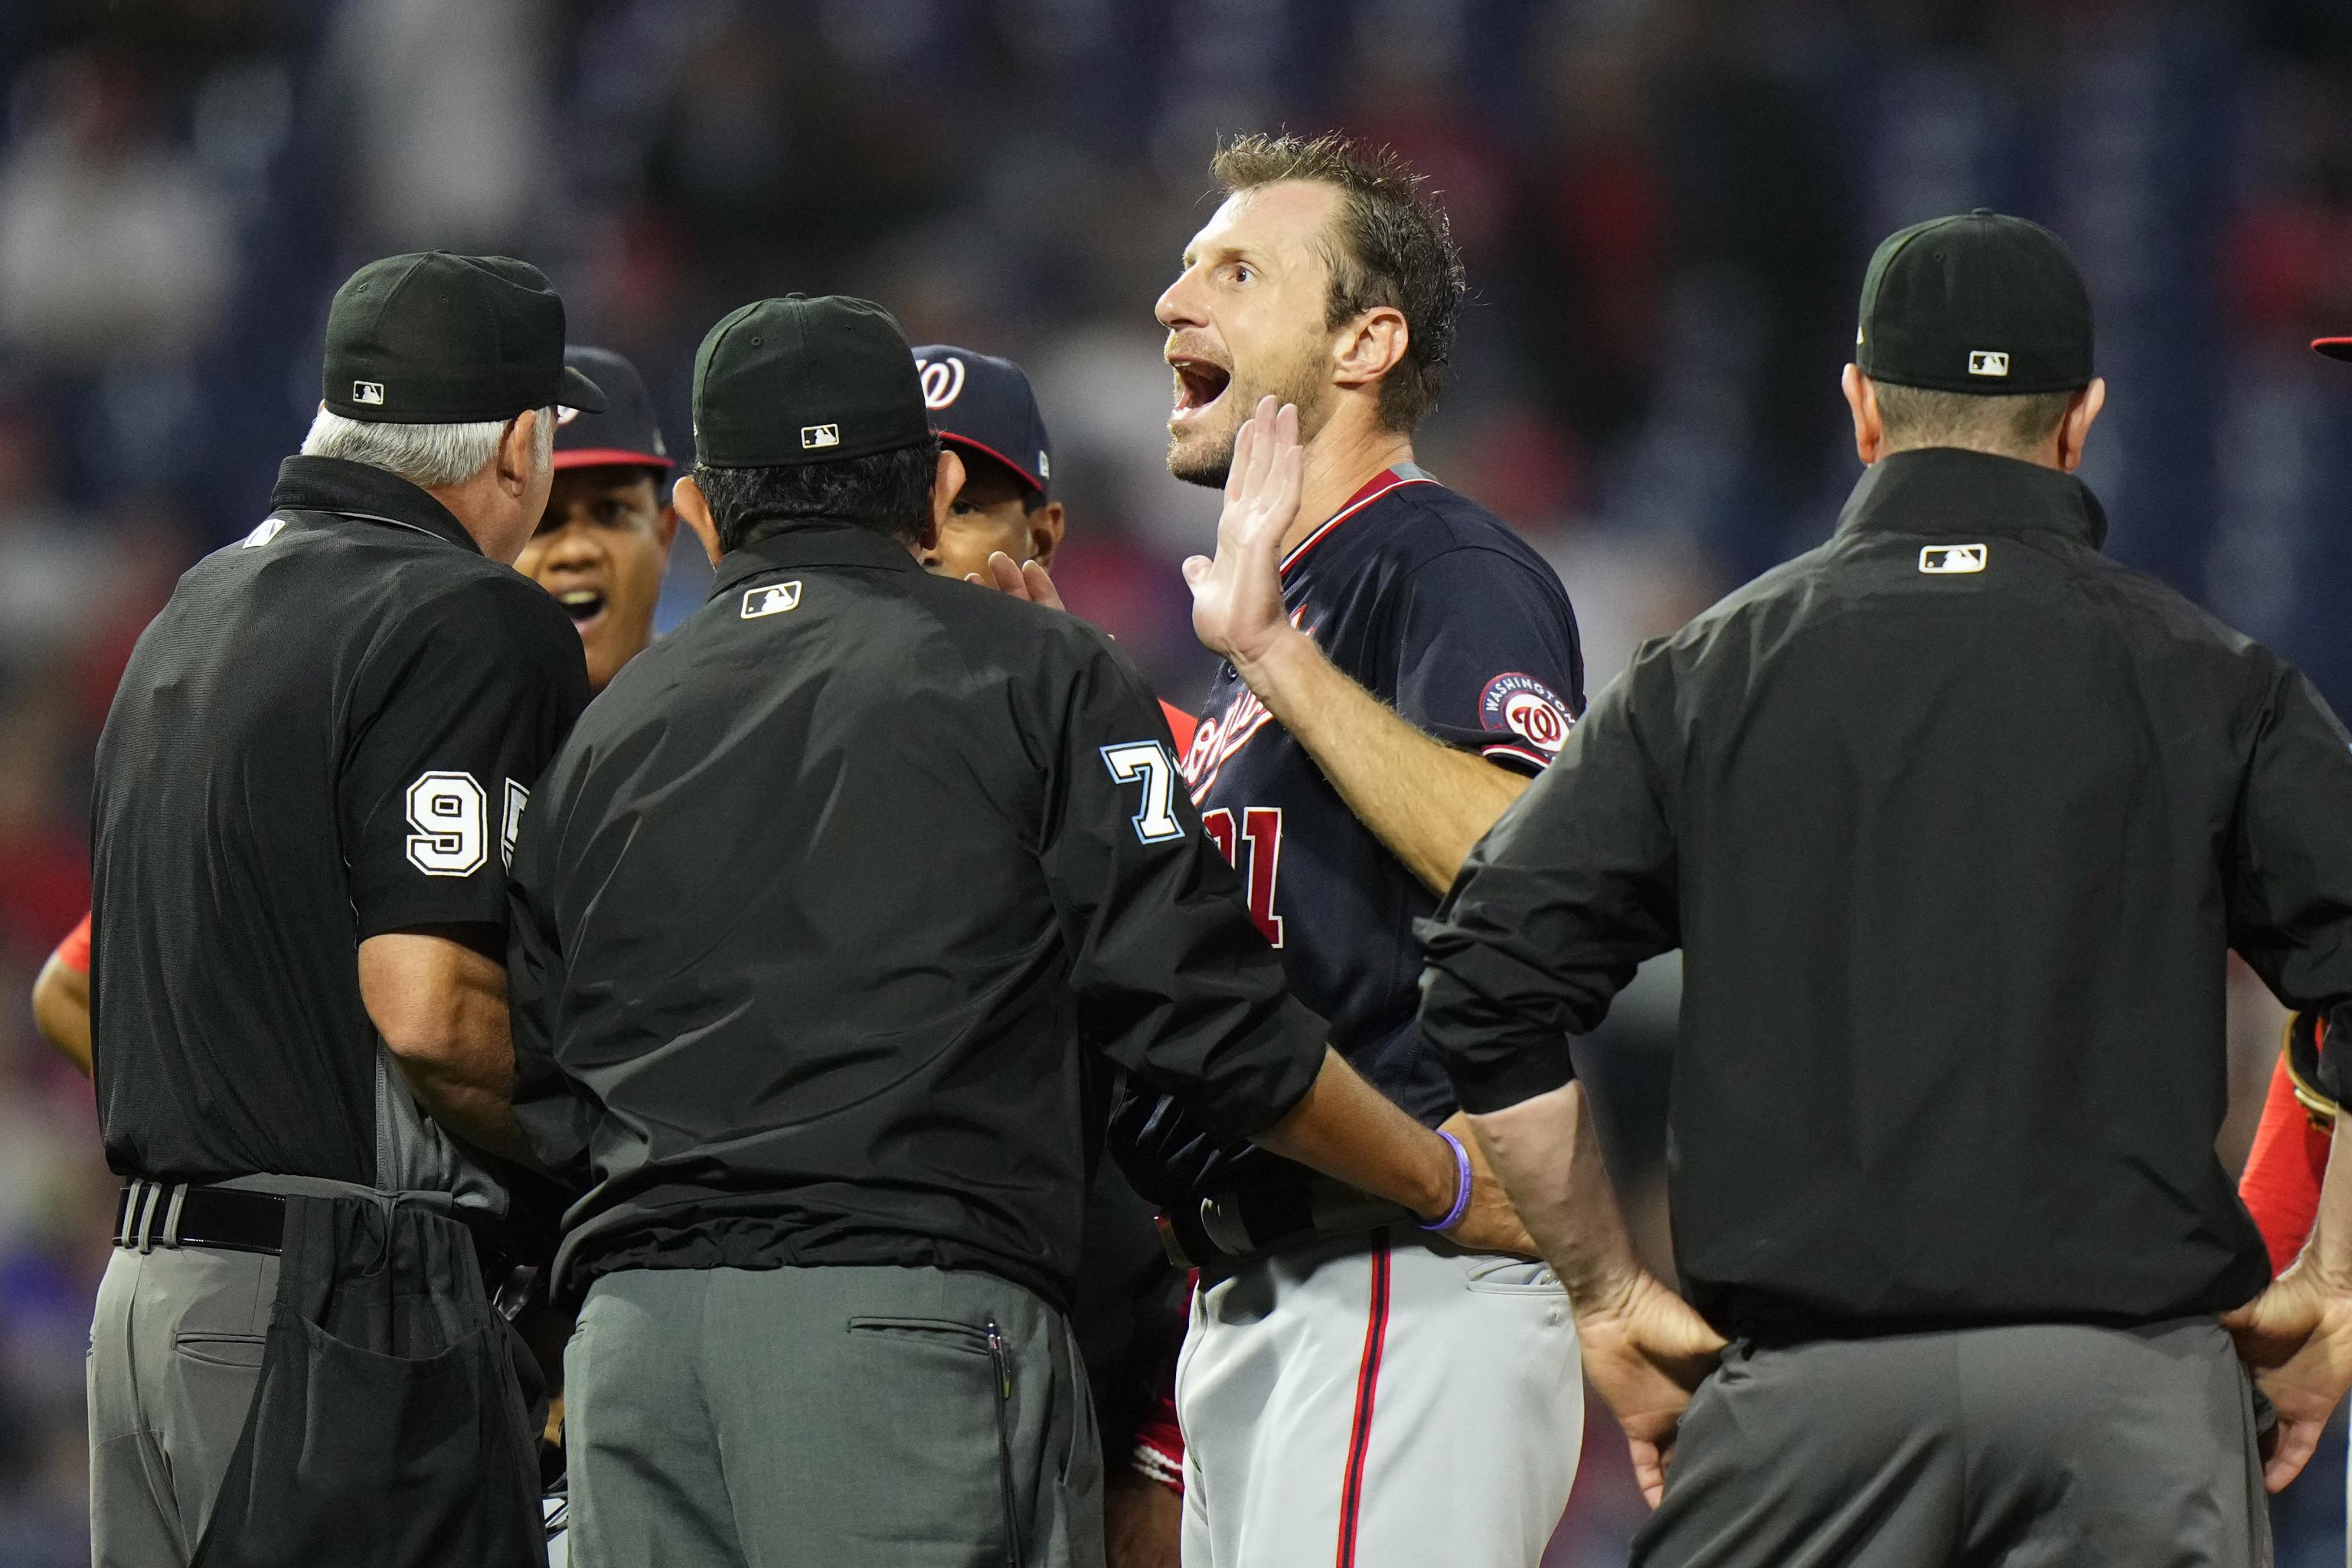 Umpires explain Max Scherzer's ejection for sticky substance in